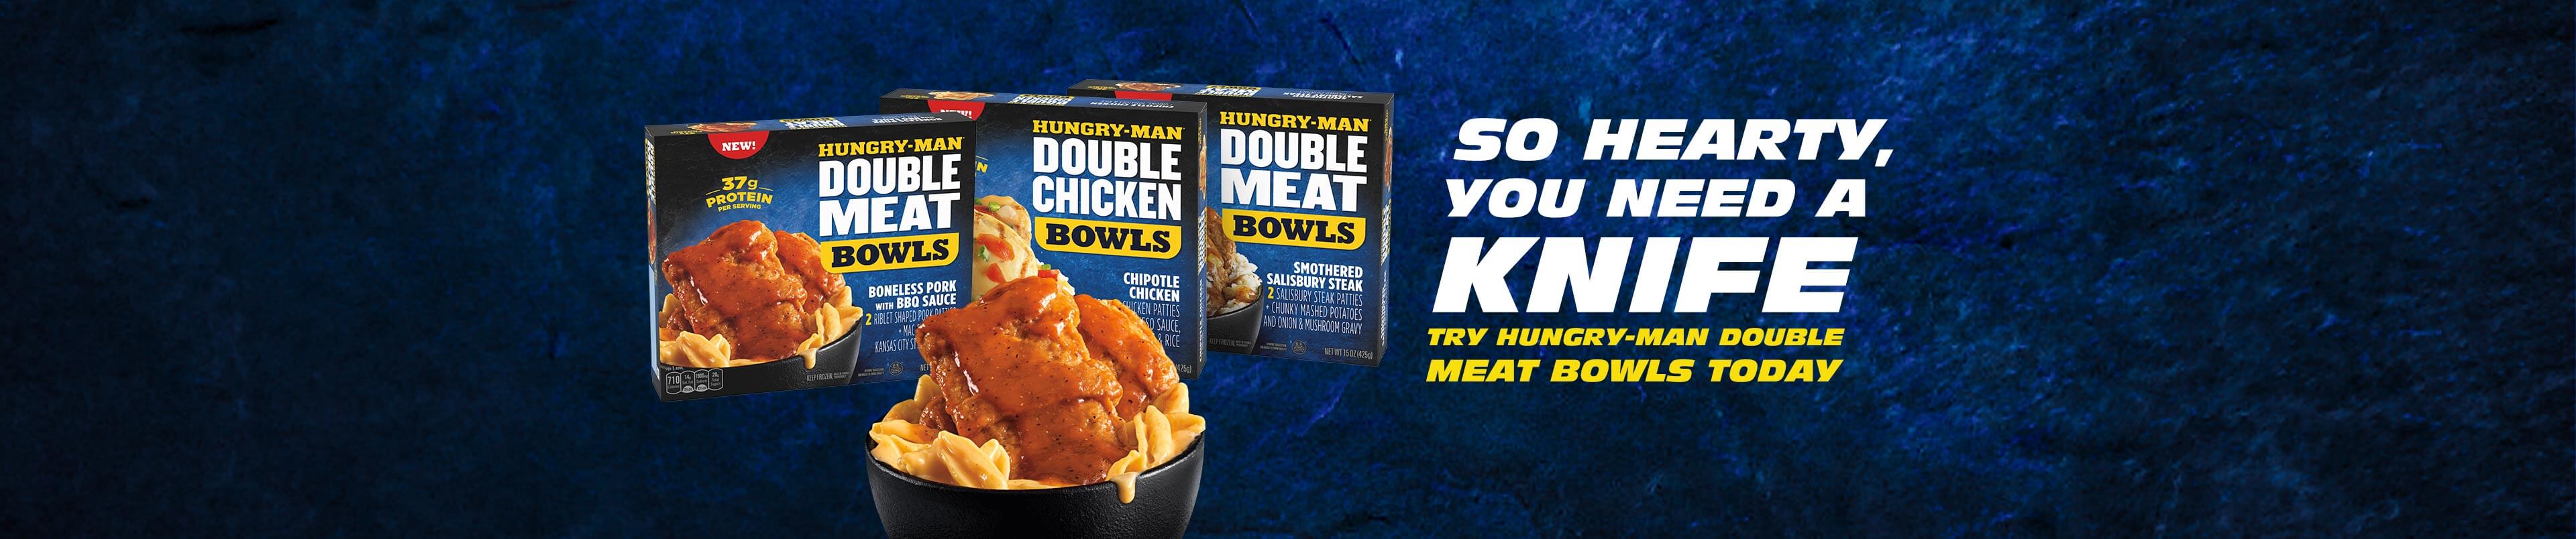 So hearty, you need a knife. Try Hungry-Man Double Meat Bowls today.